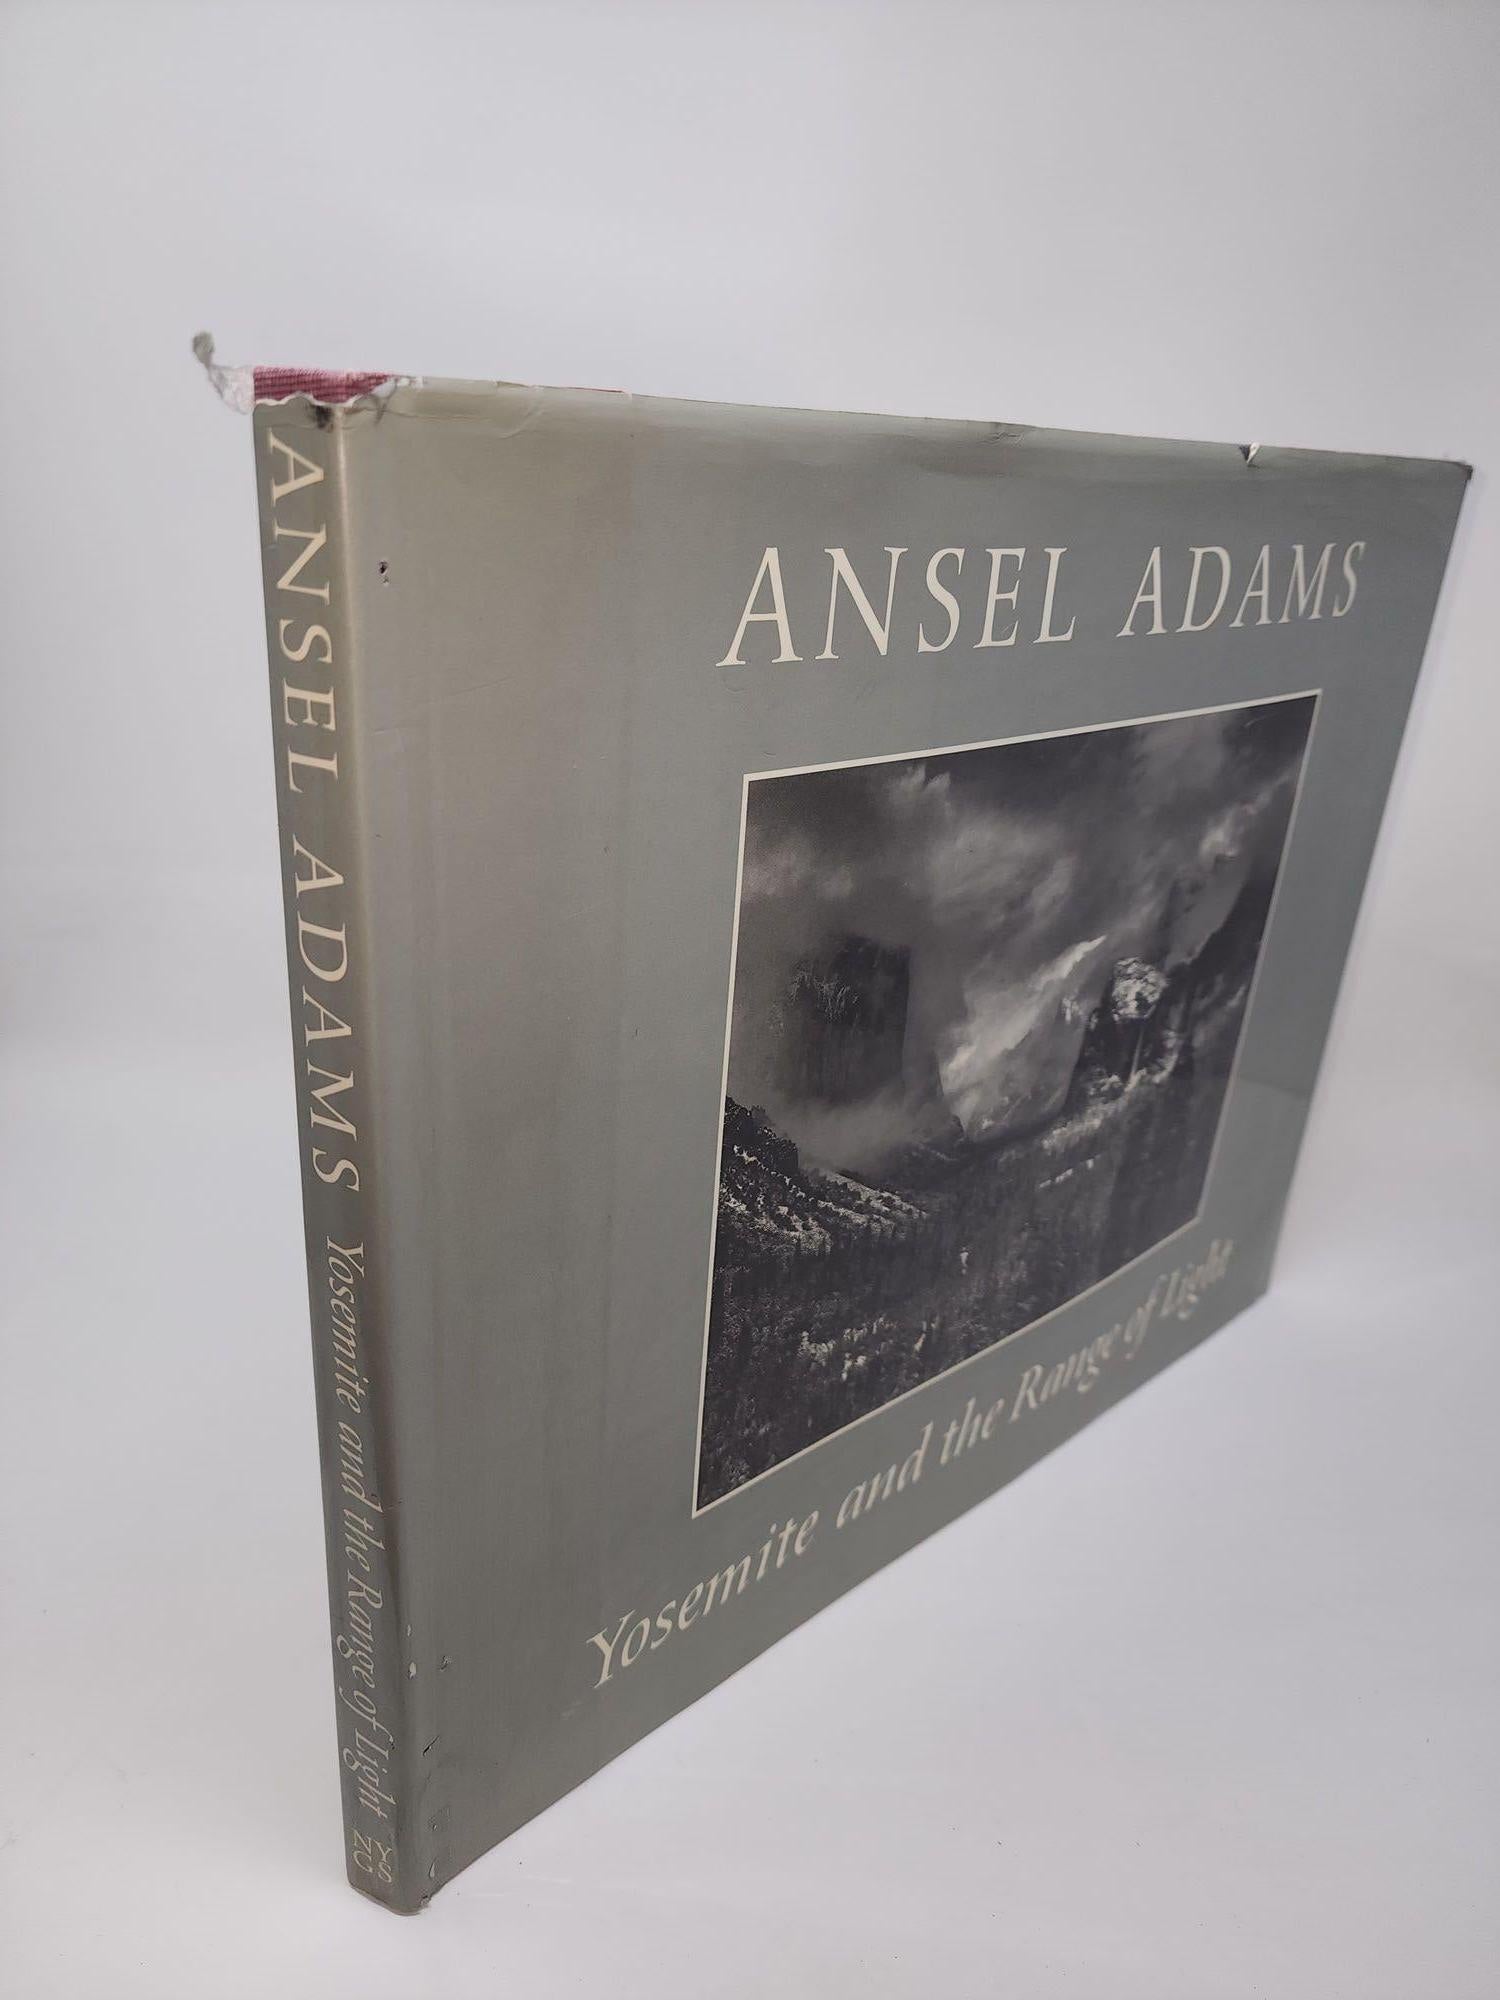 Expressionniste Yosemite and the Range of Light Ansel Adams Signed 1st Edition en vente